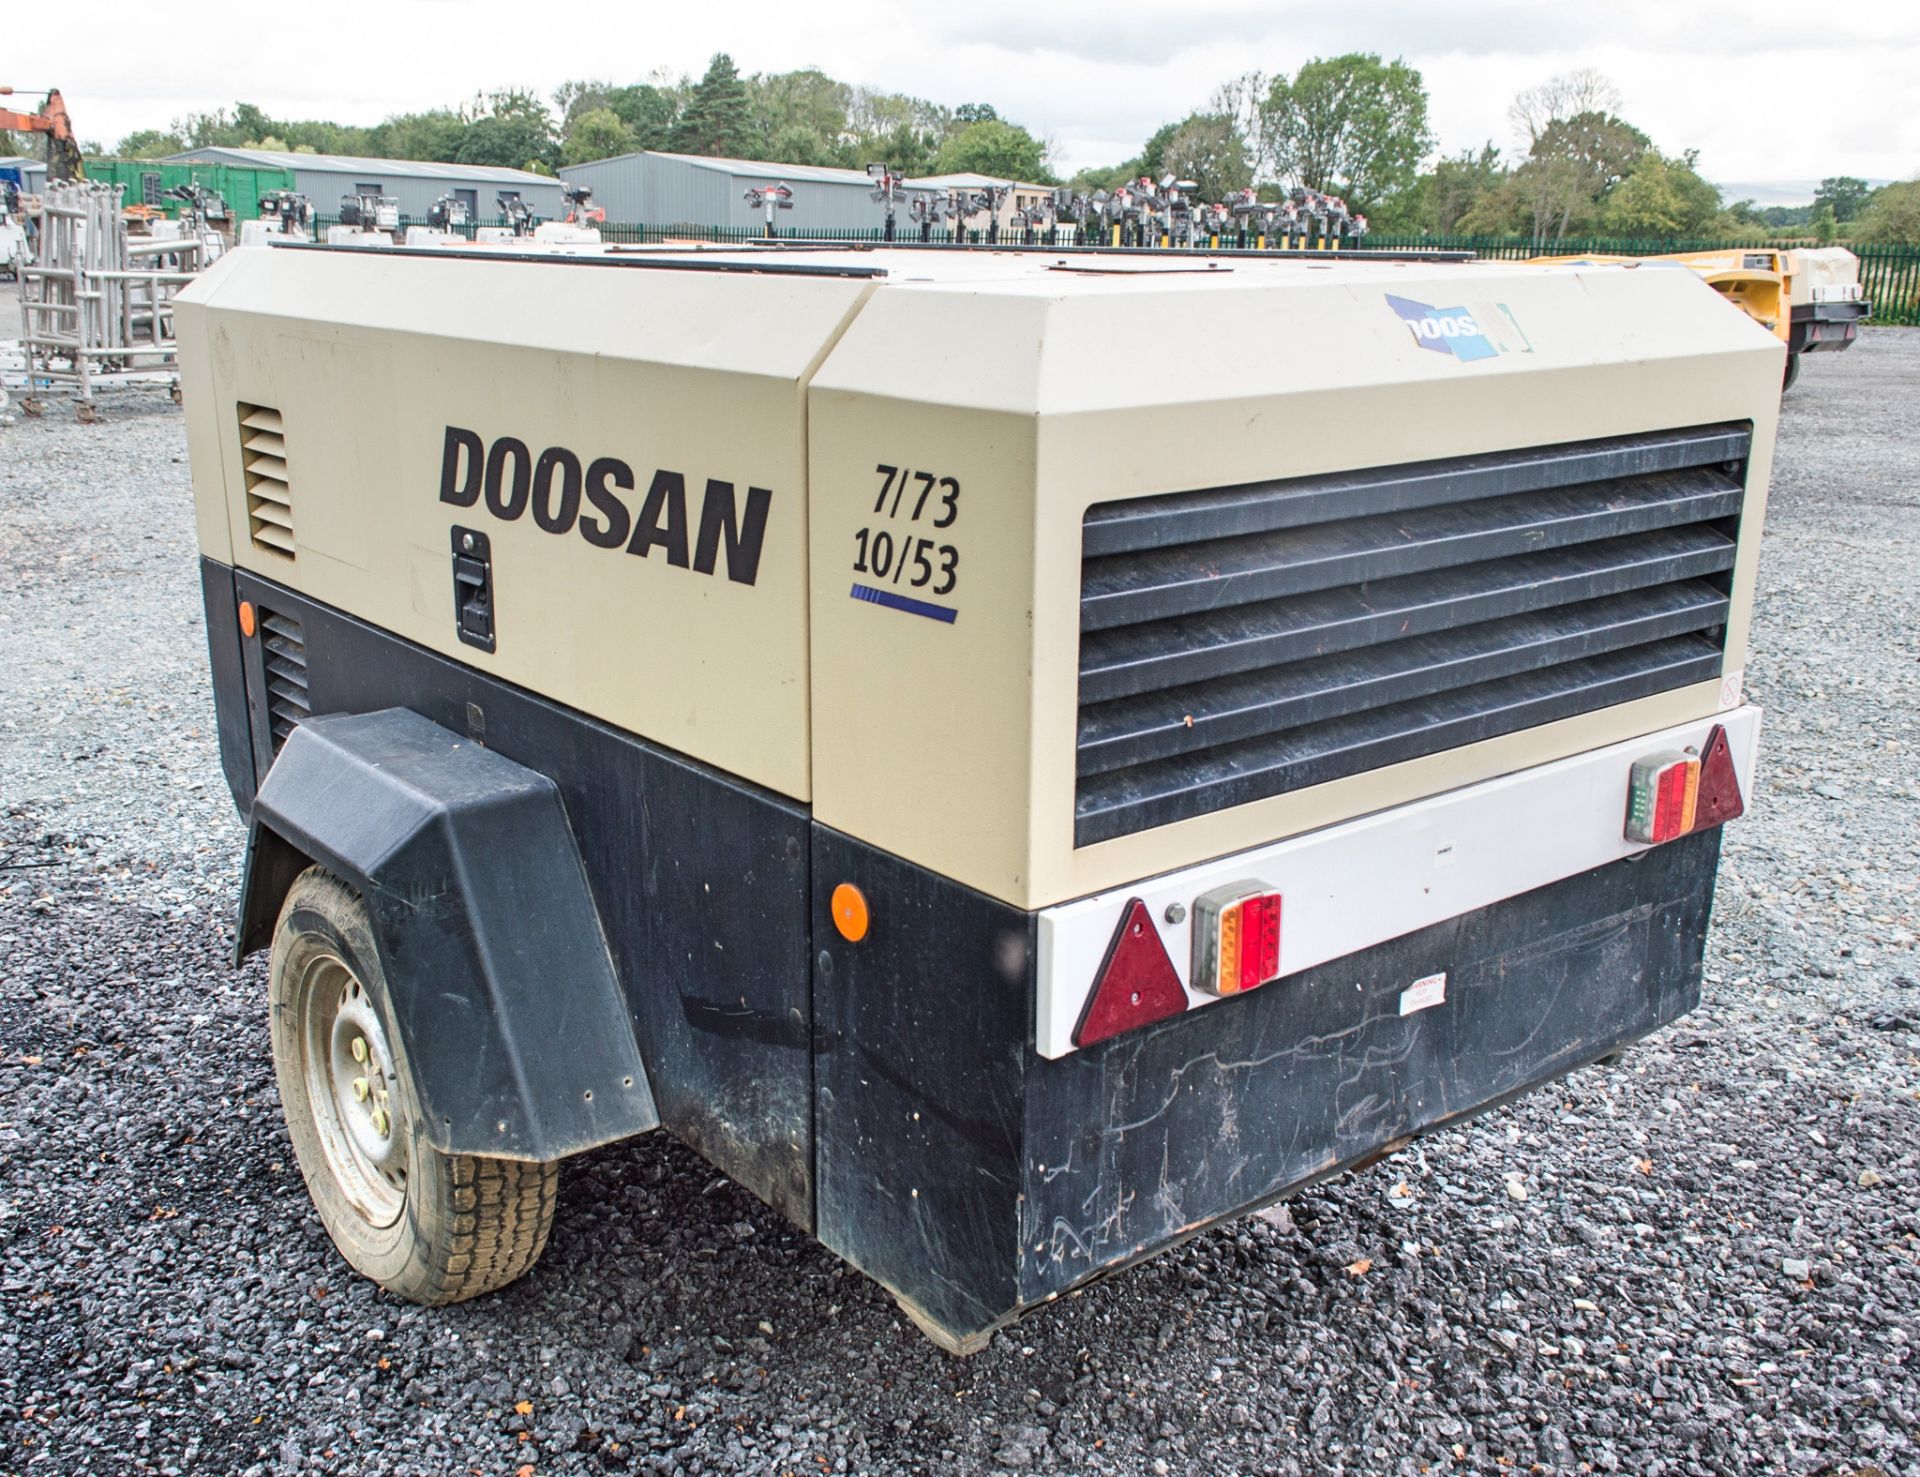 Doosan 7/73-10/53 diesel driven mobile air compressor Year: 2015 S/N: 543511 Recorded Hours: 1195 - Image 2 of 6